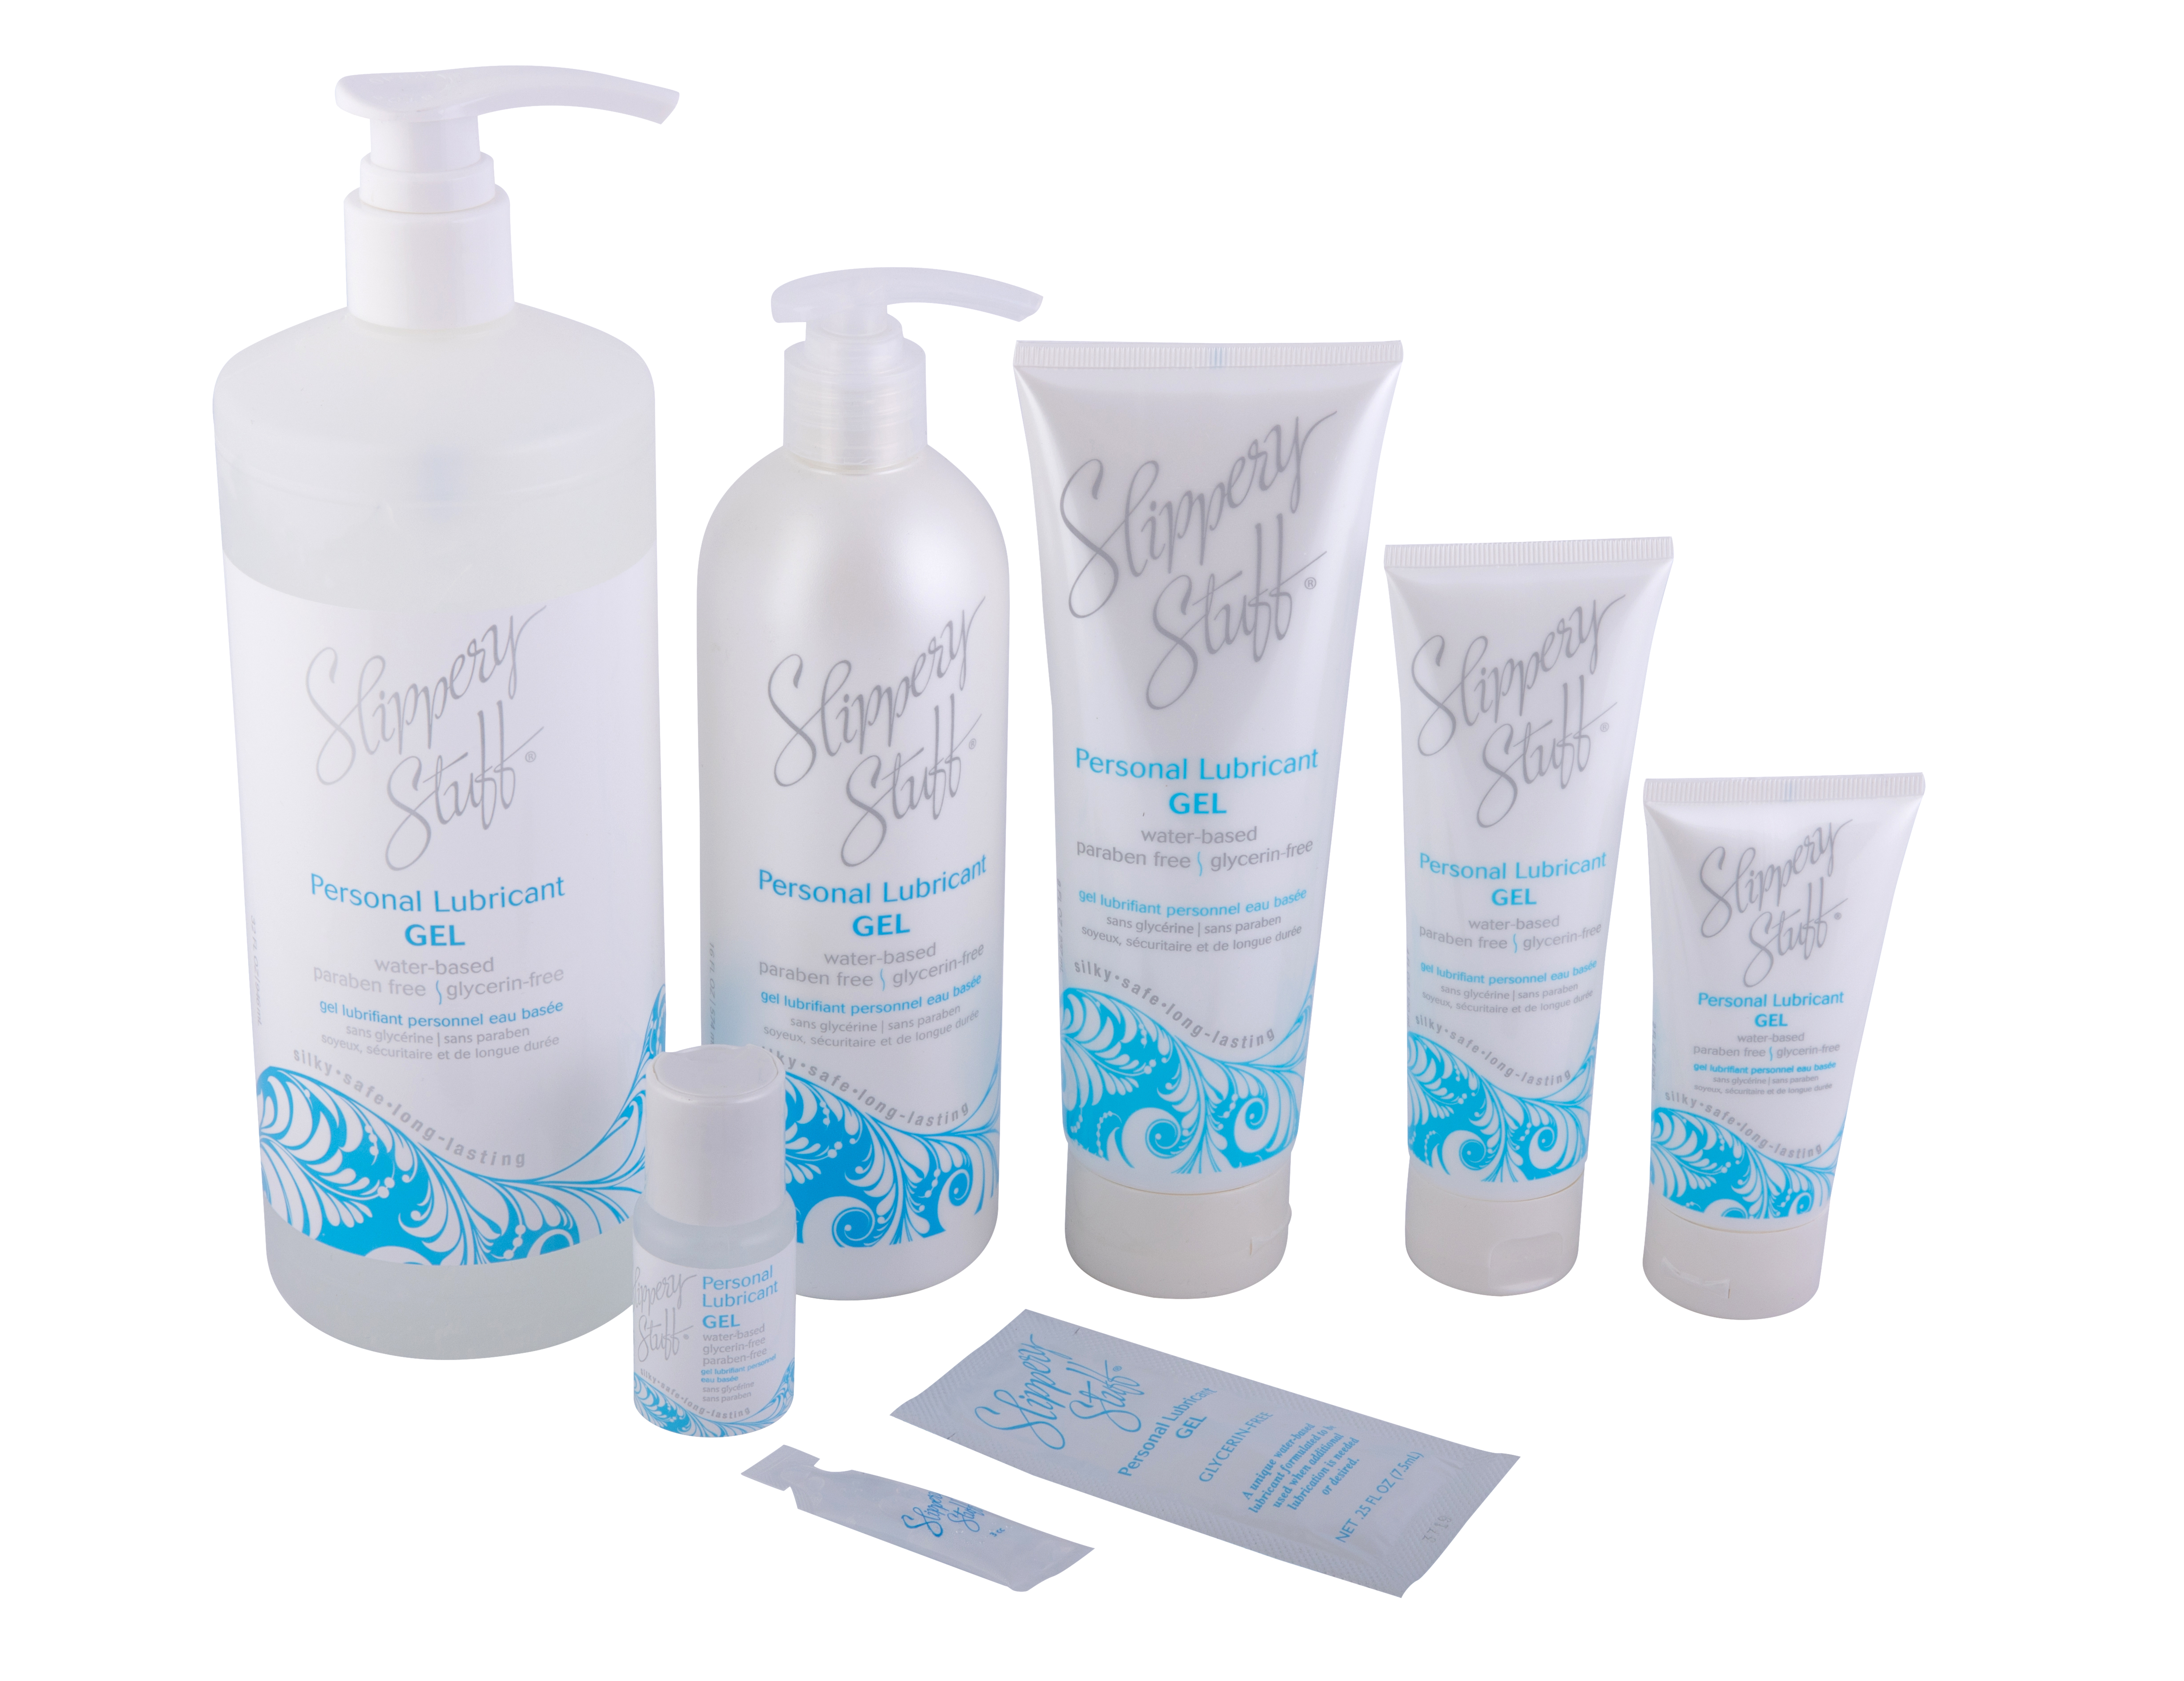 Slippery Stuff Paraben-Free Gel Personal Lubricant Water Soluble Wallace OFarrell